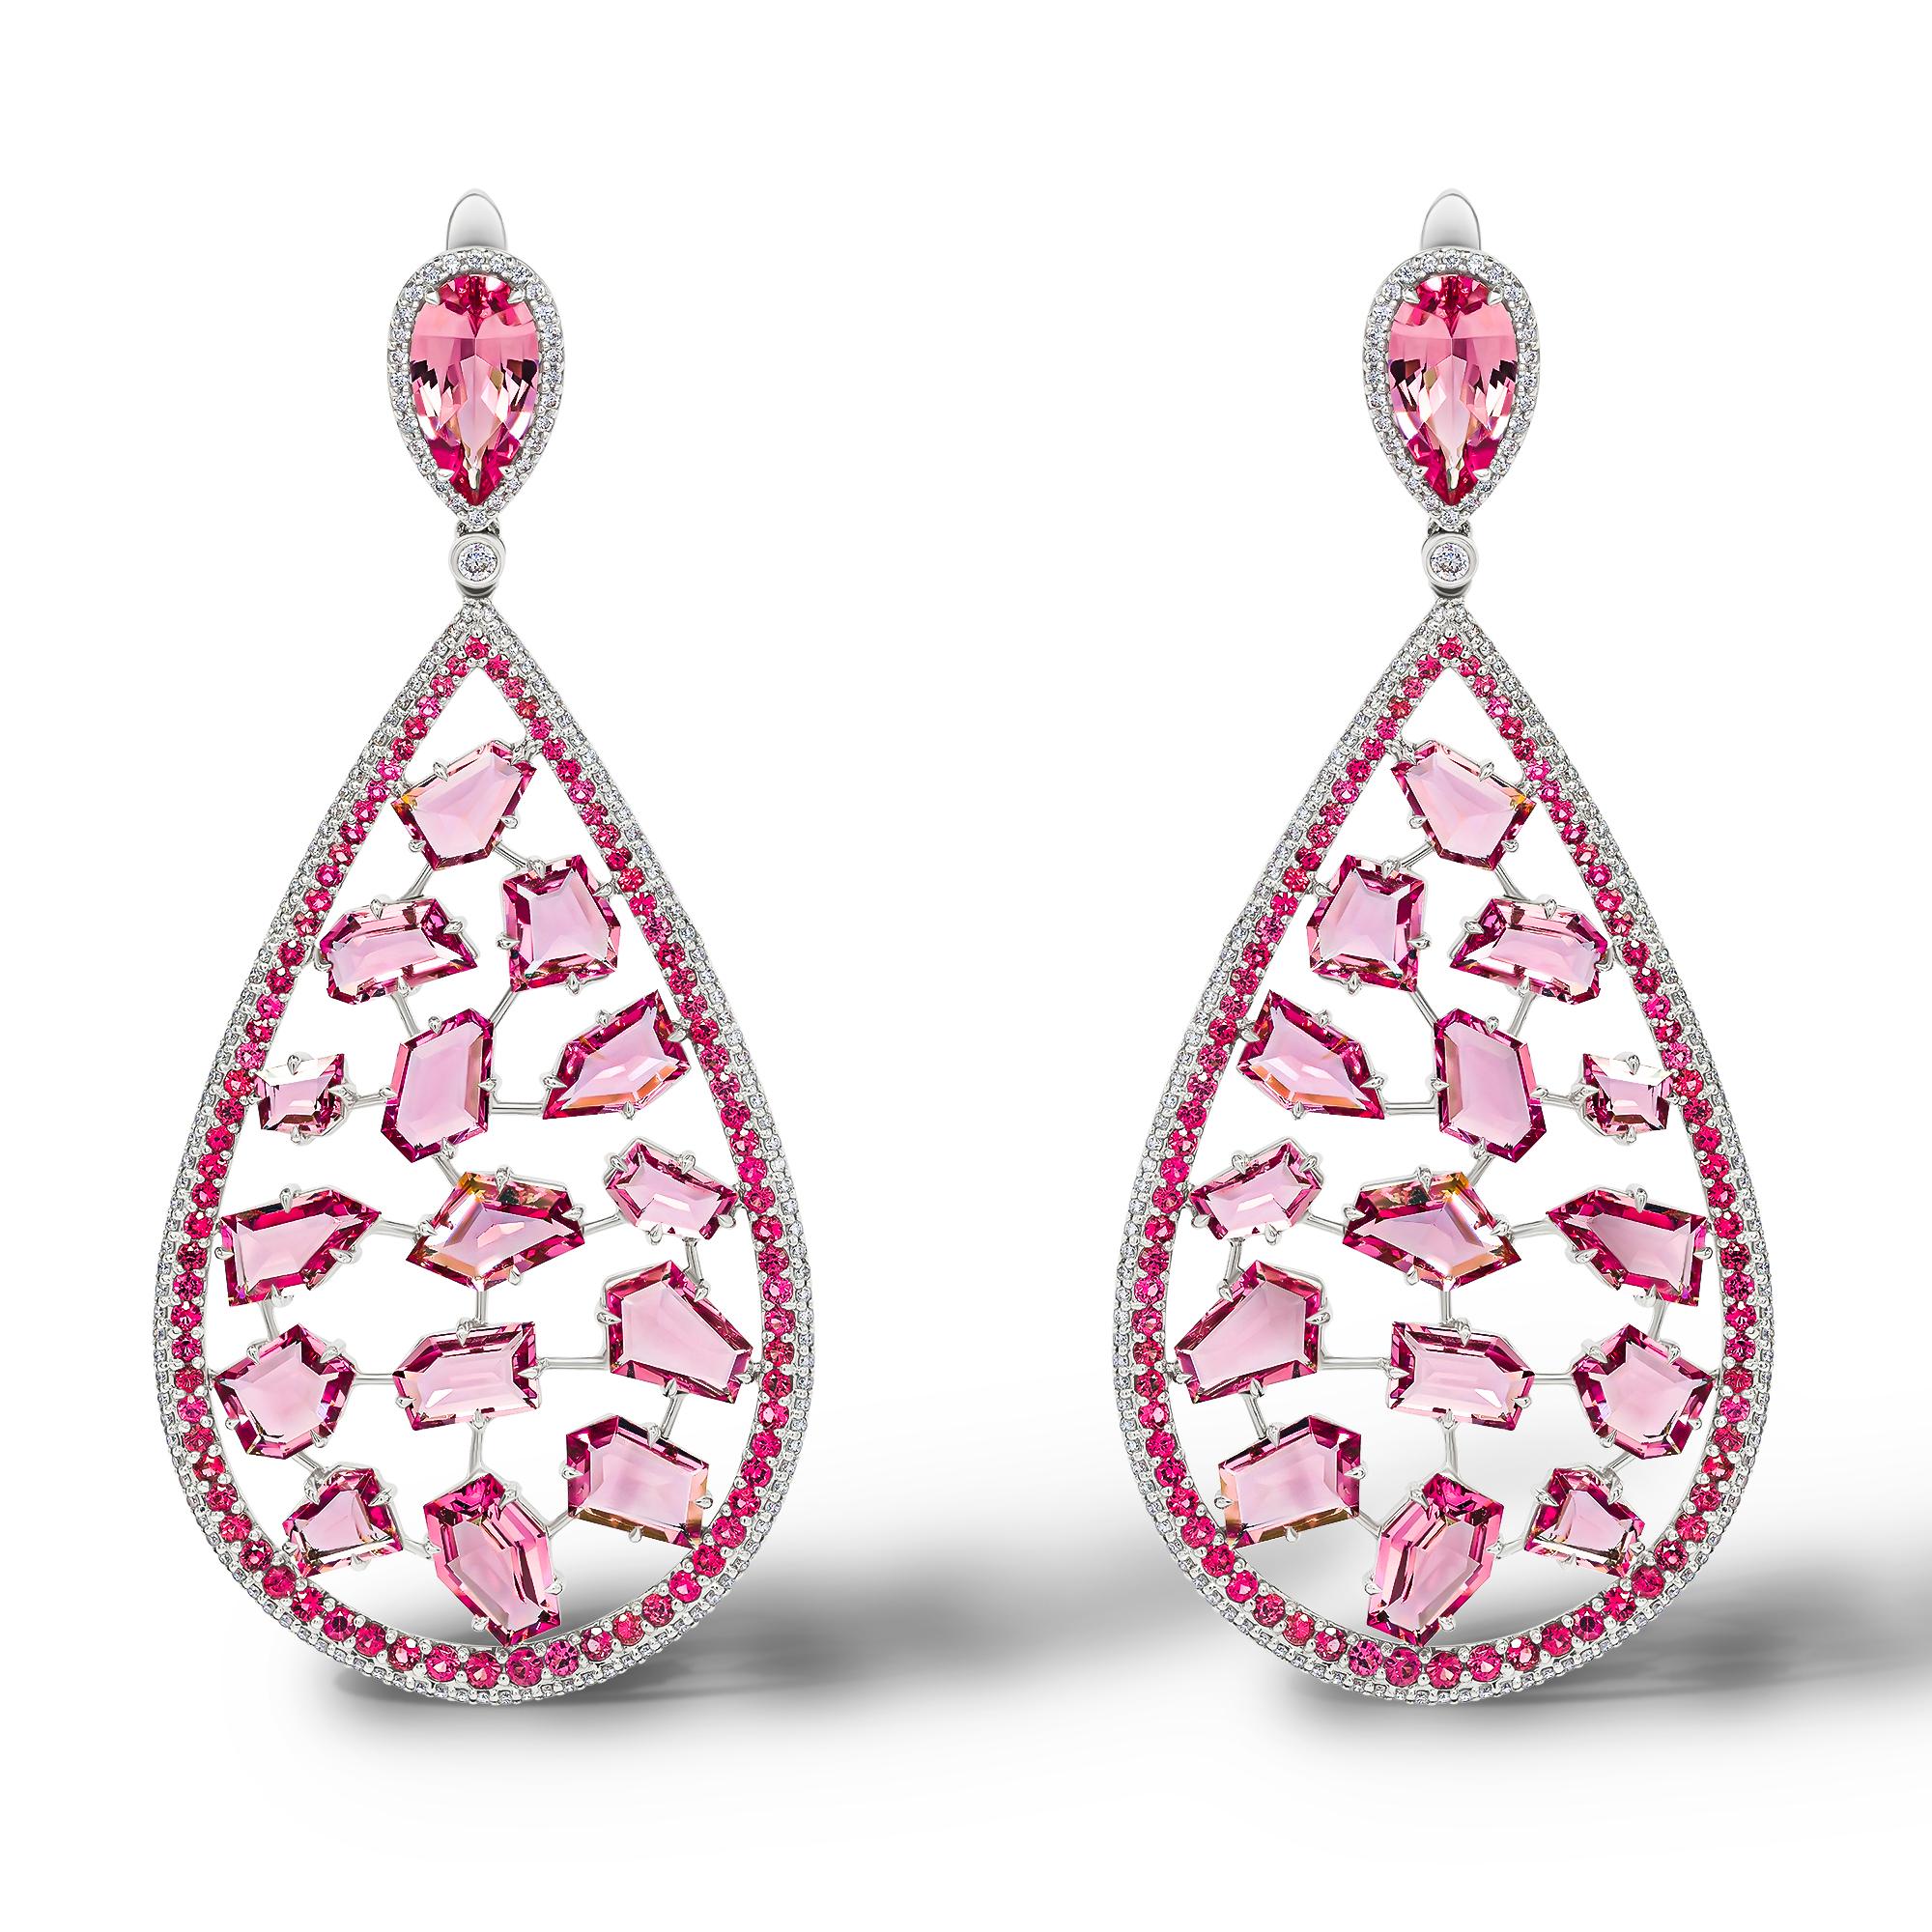 •	18k White Gold. 
•	Pink Spinels in Drop cut – 2 pc total carat weight – 6.
•	Pink Spinels in Fantasy cut – total carat weight – 28.
•	Red Spinels in round cut – total carat weight – 1.
•	‘ cm each. 
•	Product Weight – 27.59 grams. 
